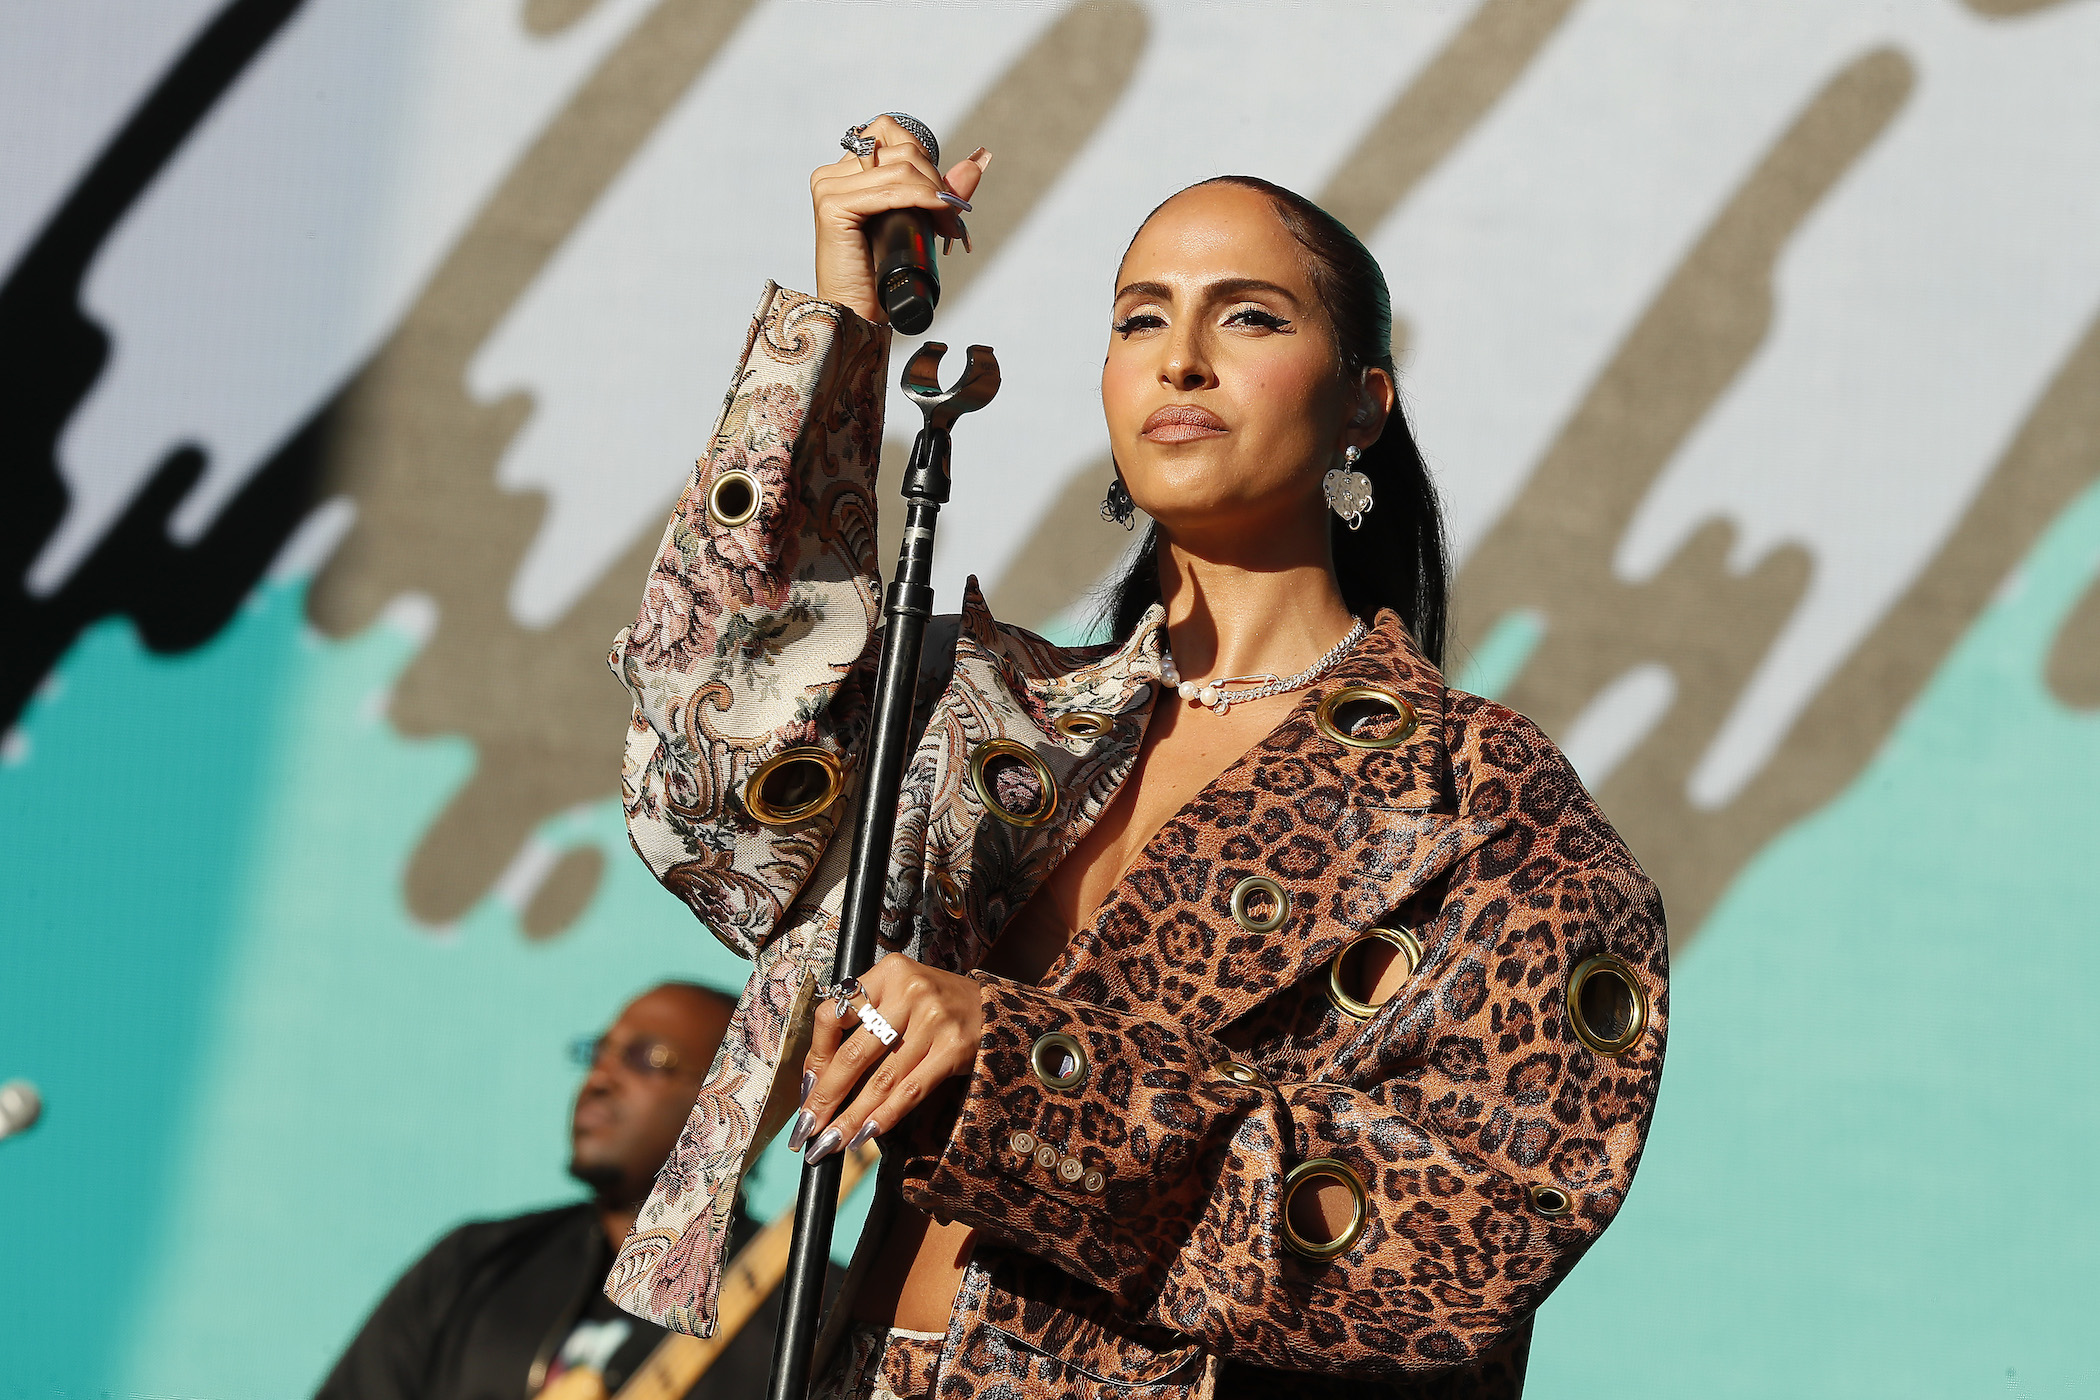 Snoh Aalegra performs at the 2022 Something in the Water Music Festival on Independence Avenue